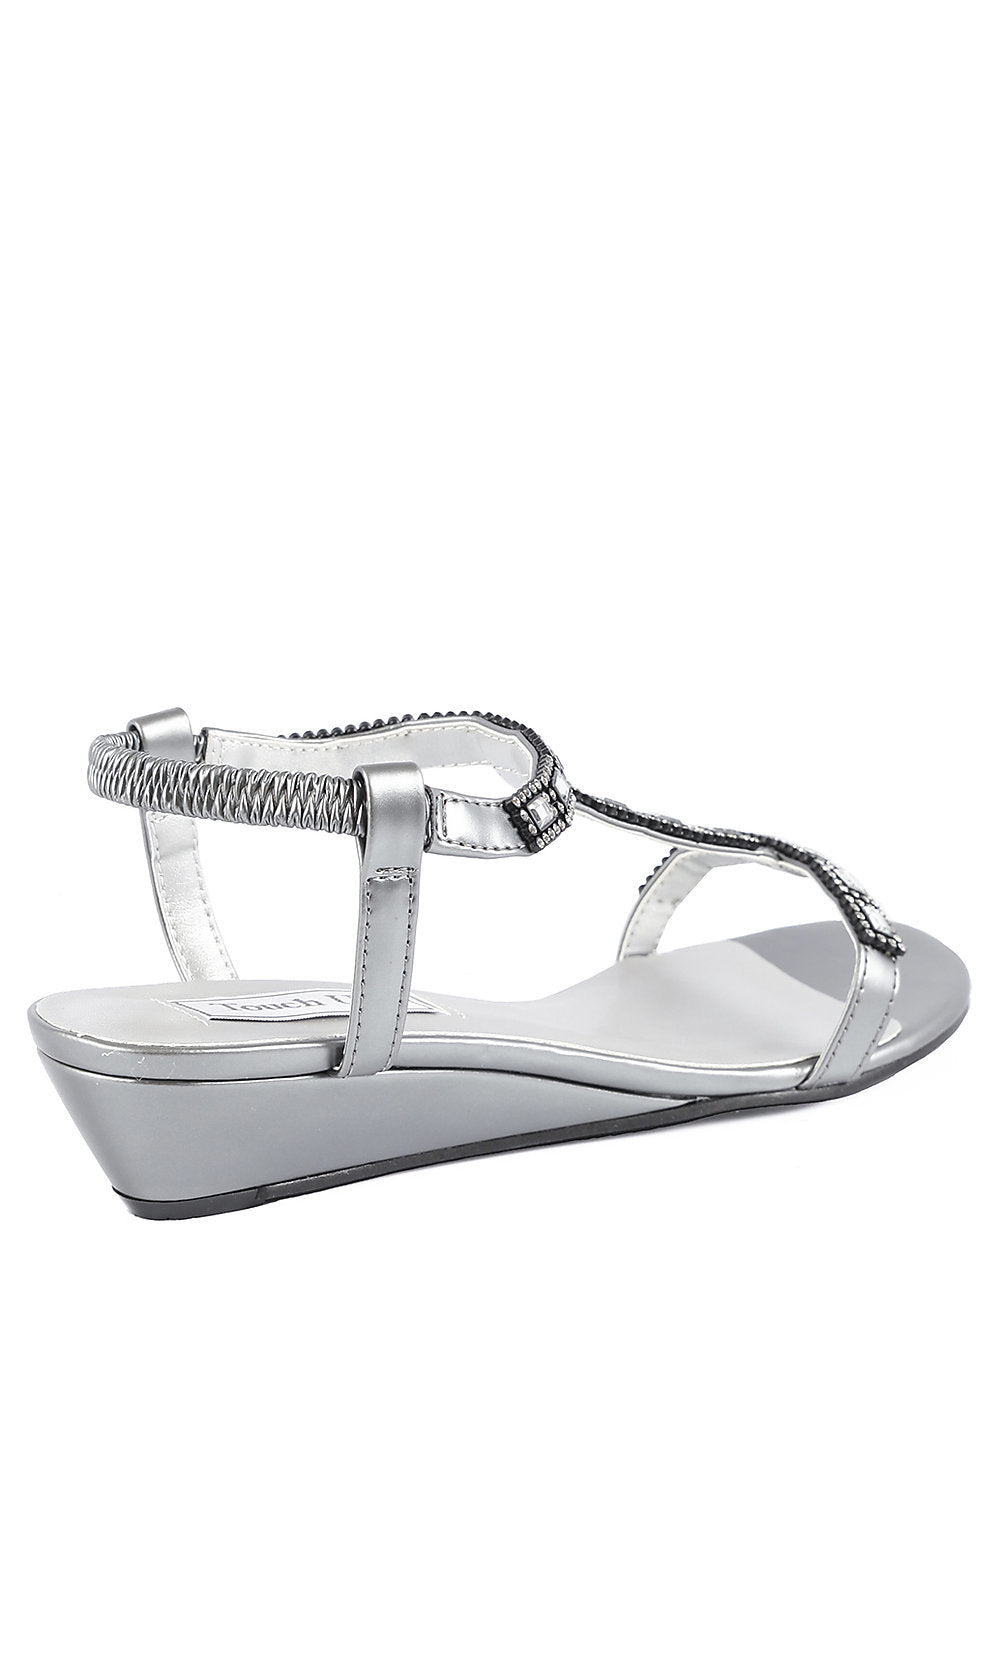 1in Pewter Sandal by Touch Ups 4122